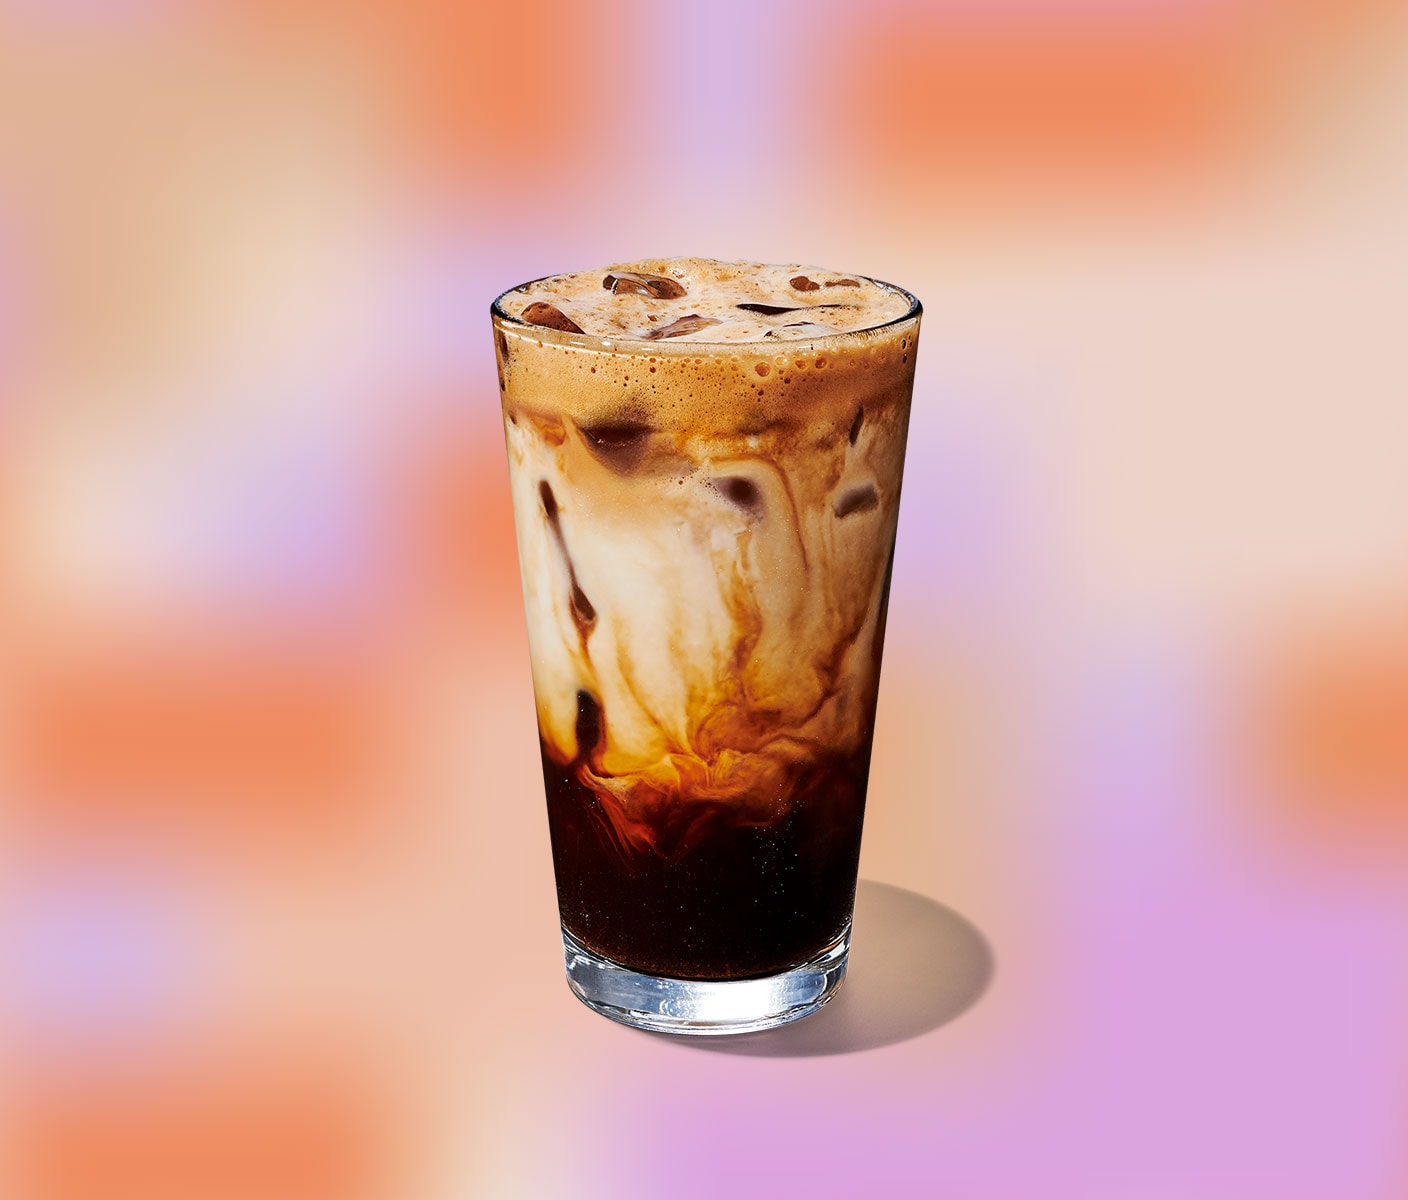 A tall, clear glass with dark espresso at the bottom and a creamy espresso swirl at the top.